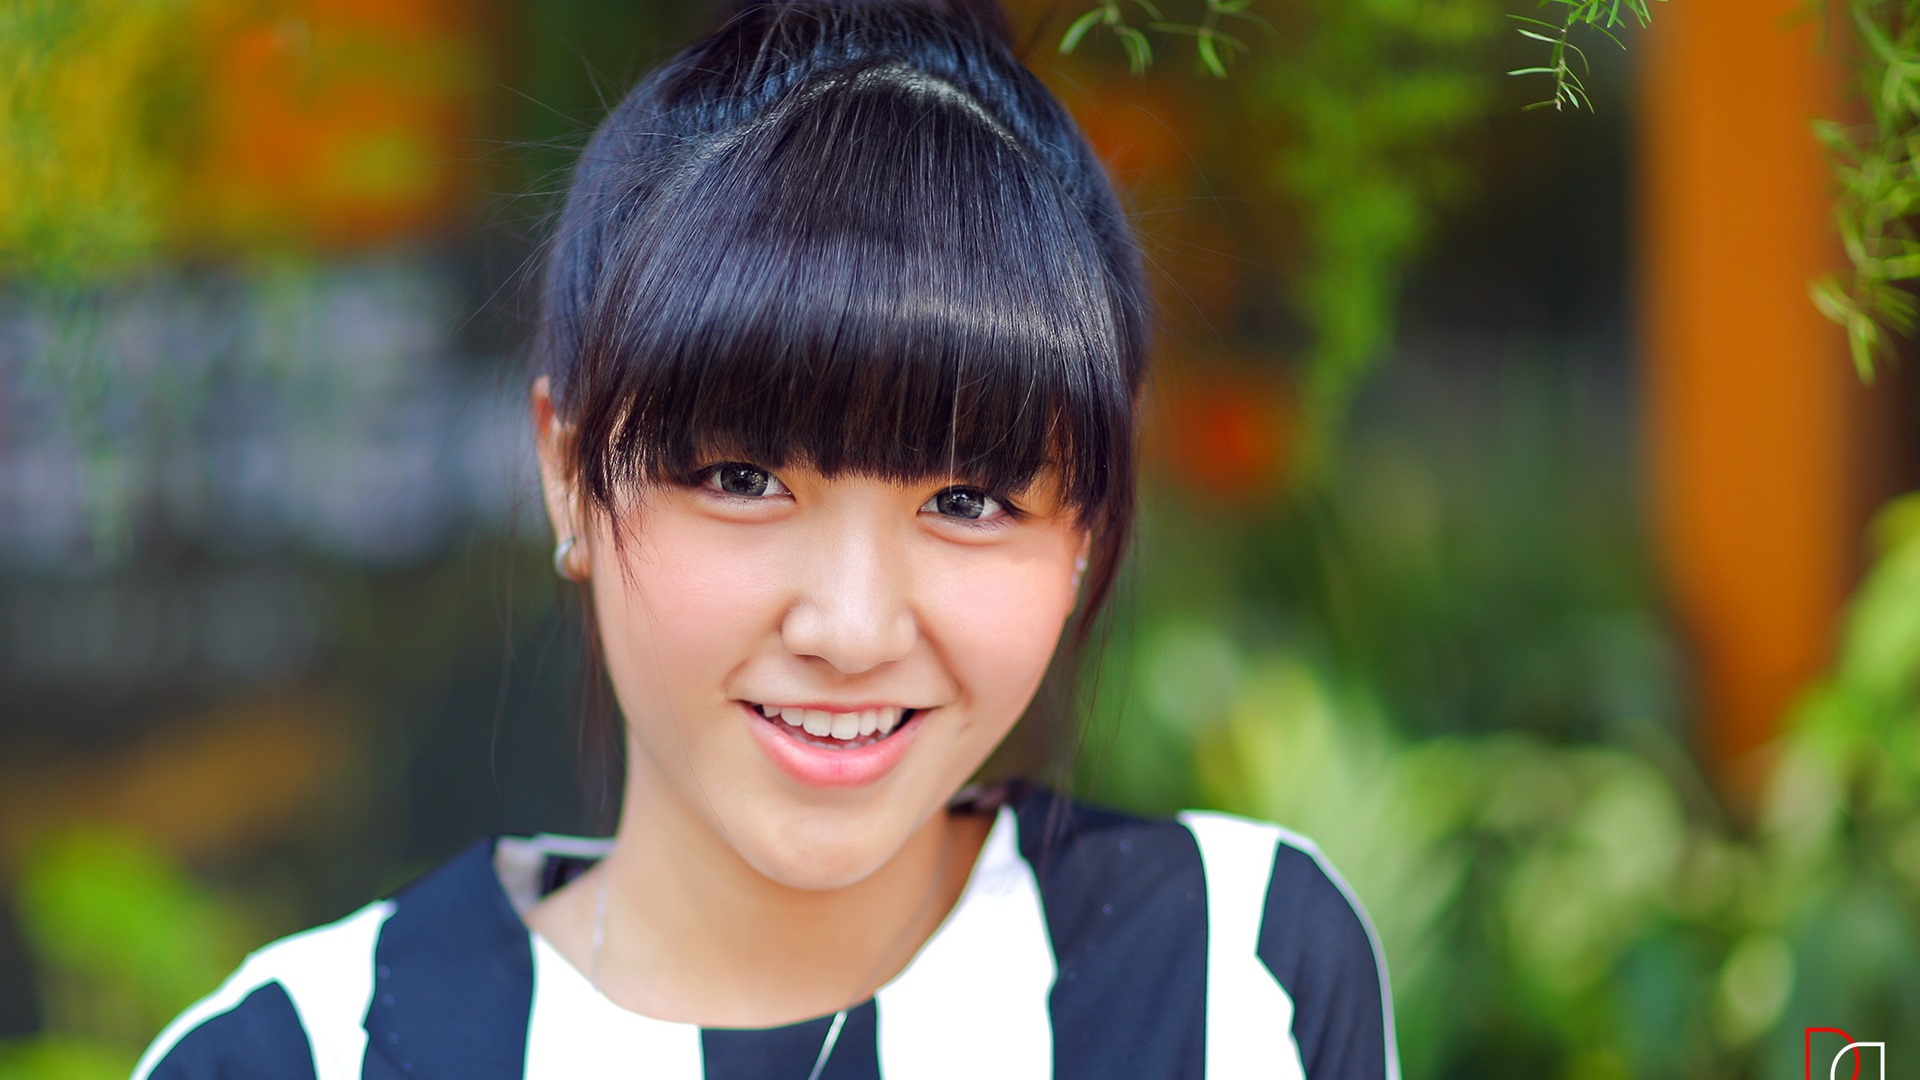 Pure and lovely young Asian girl HD wallpapers collection (4) #37 - 1920x1080